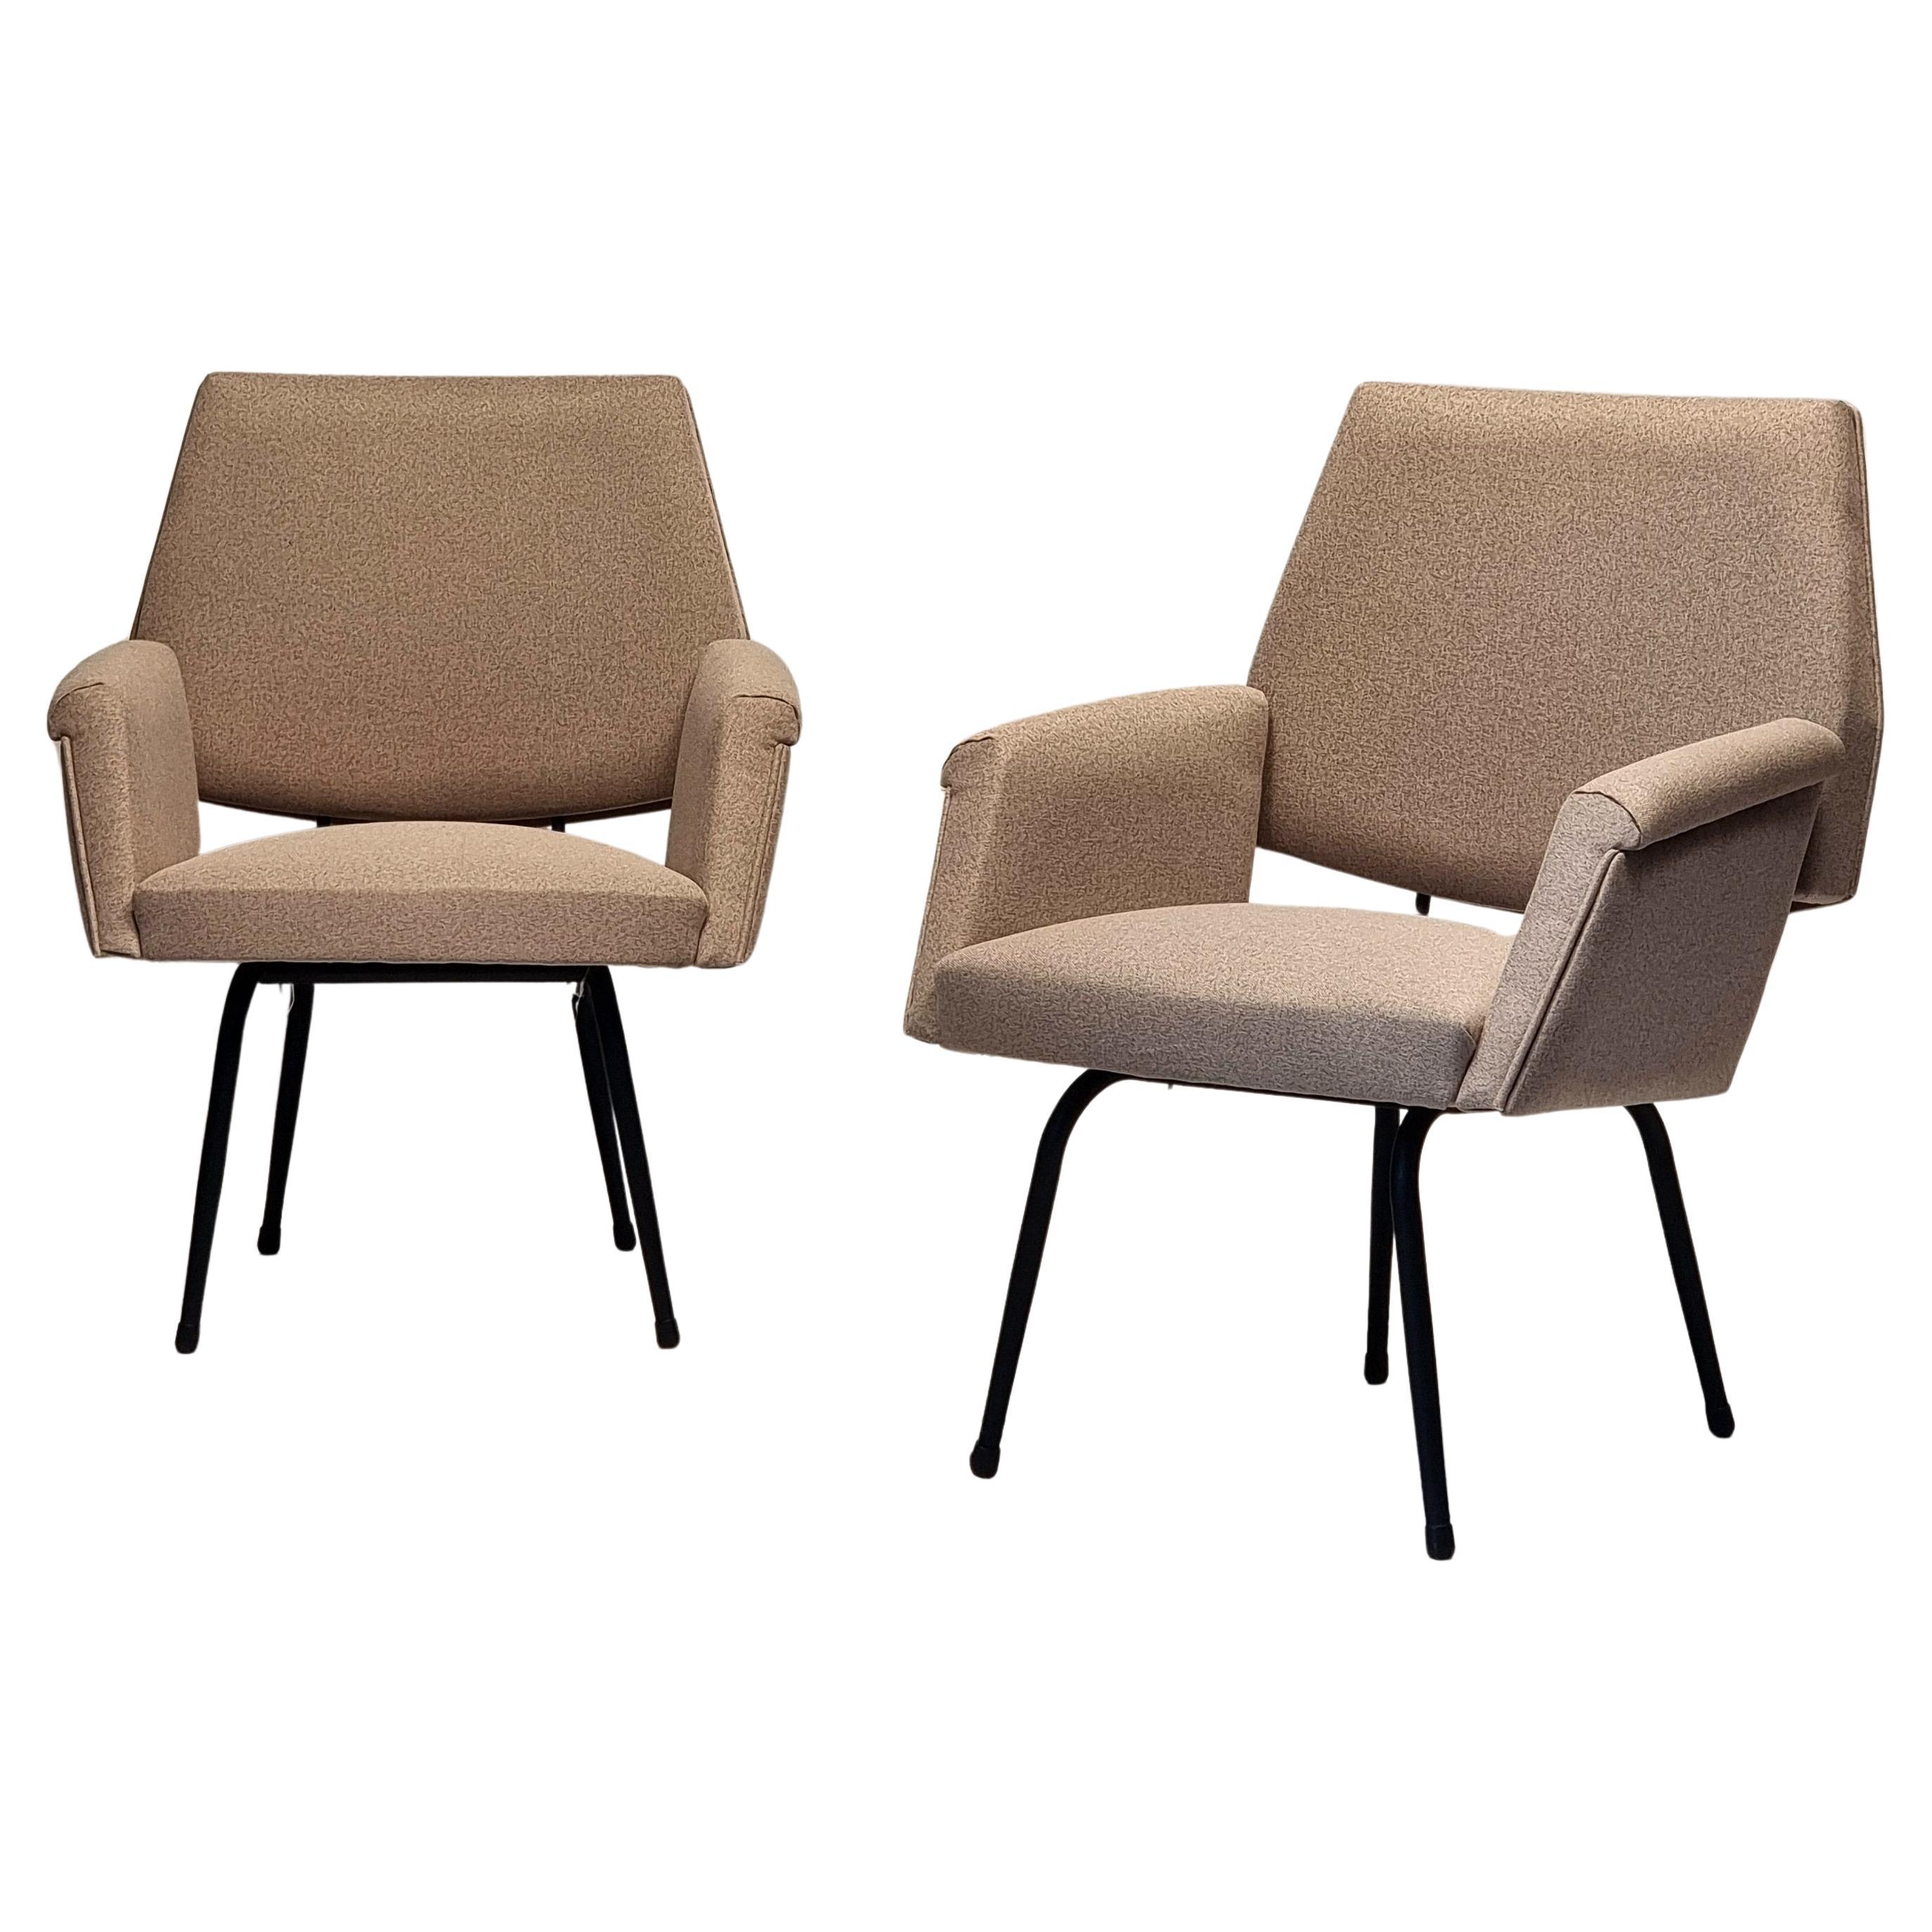 Pair Of French Armchairs - Modernist - Ca 1950 For Sale